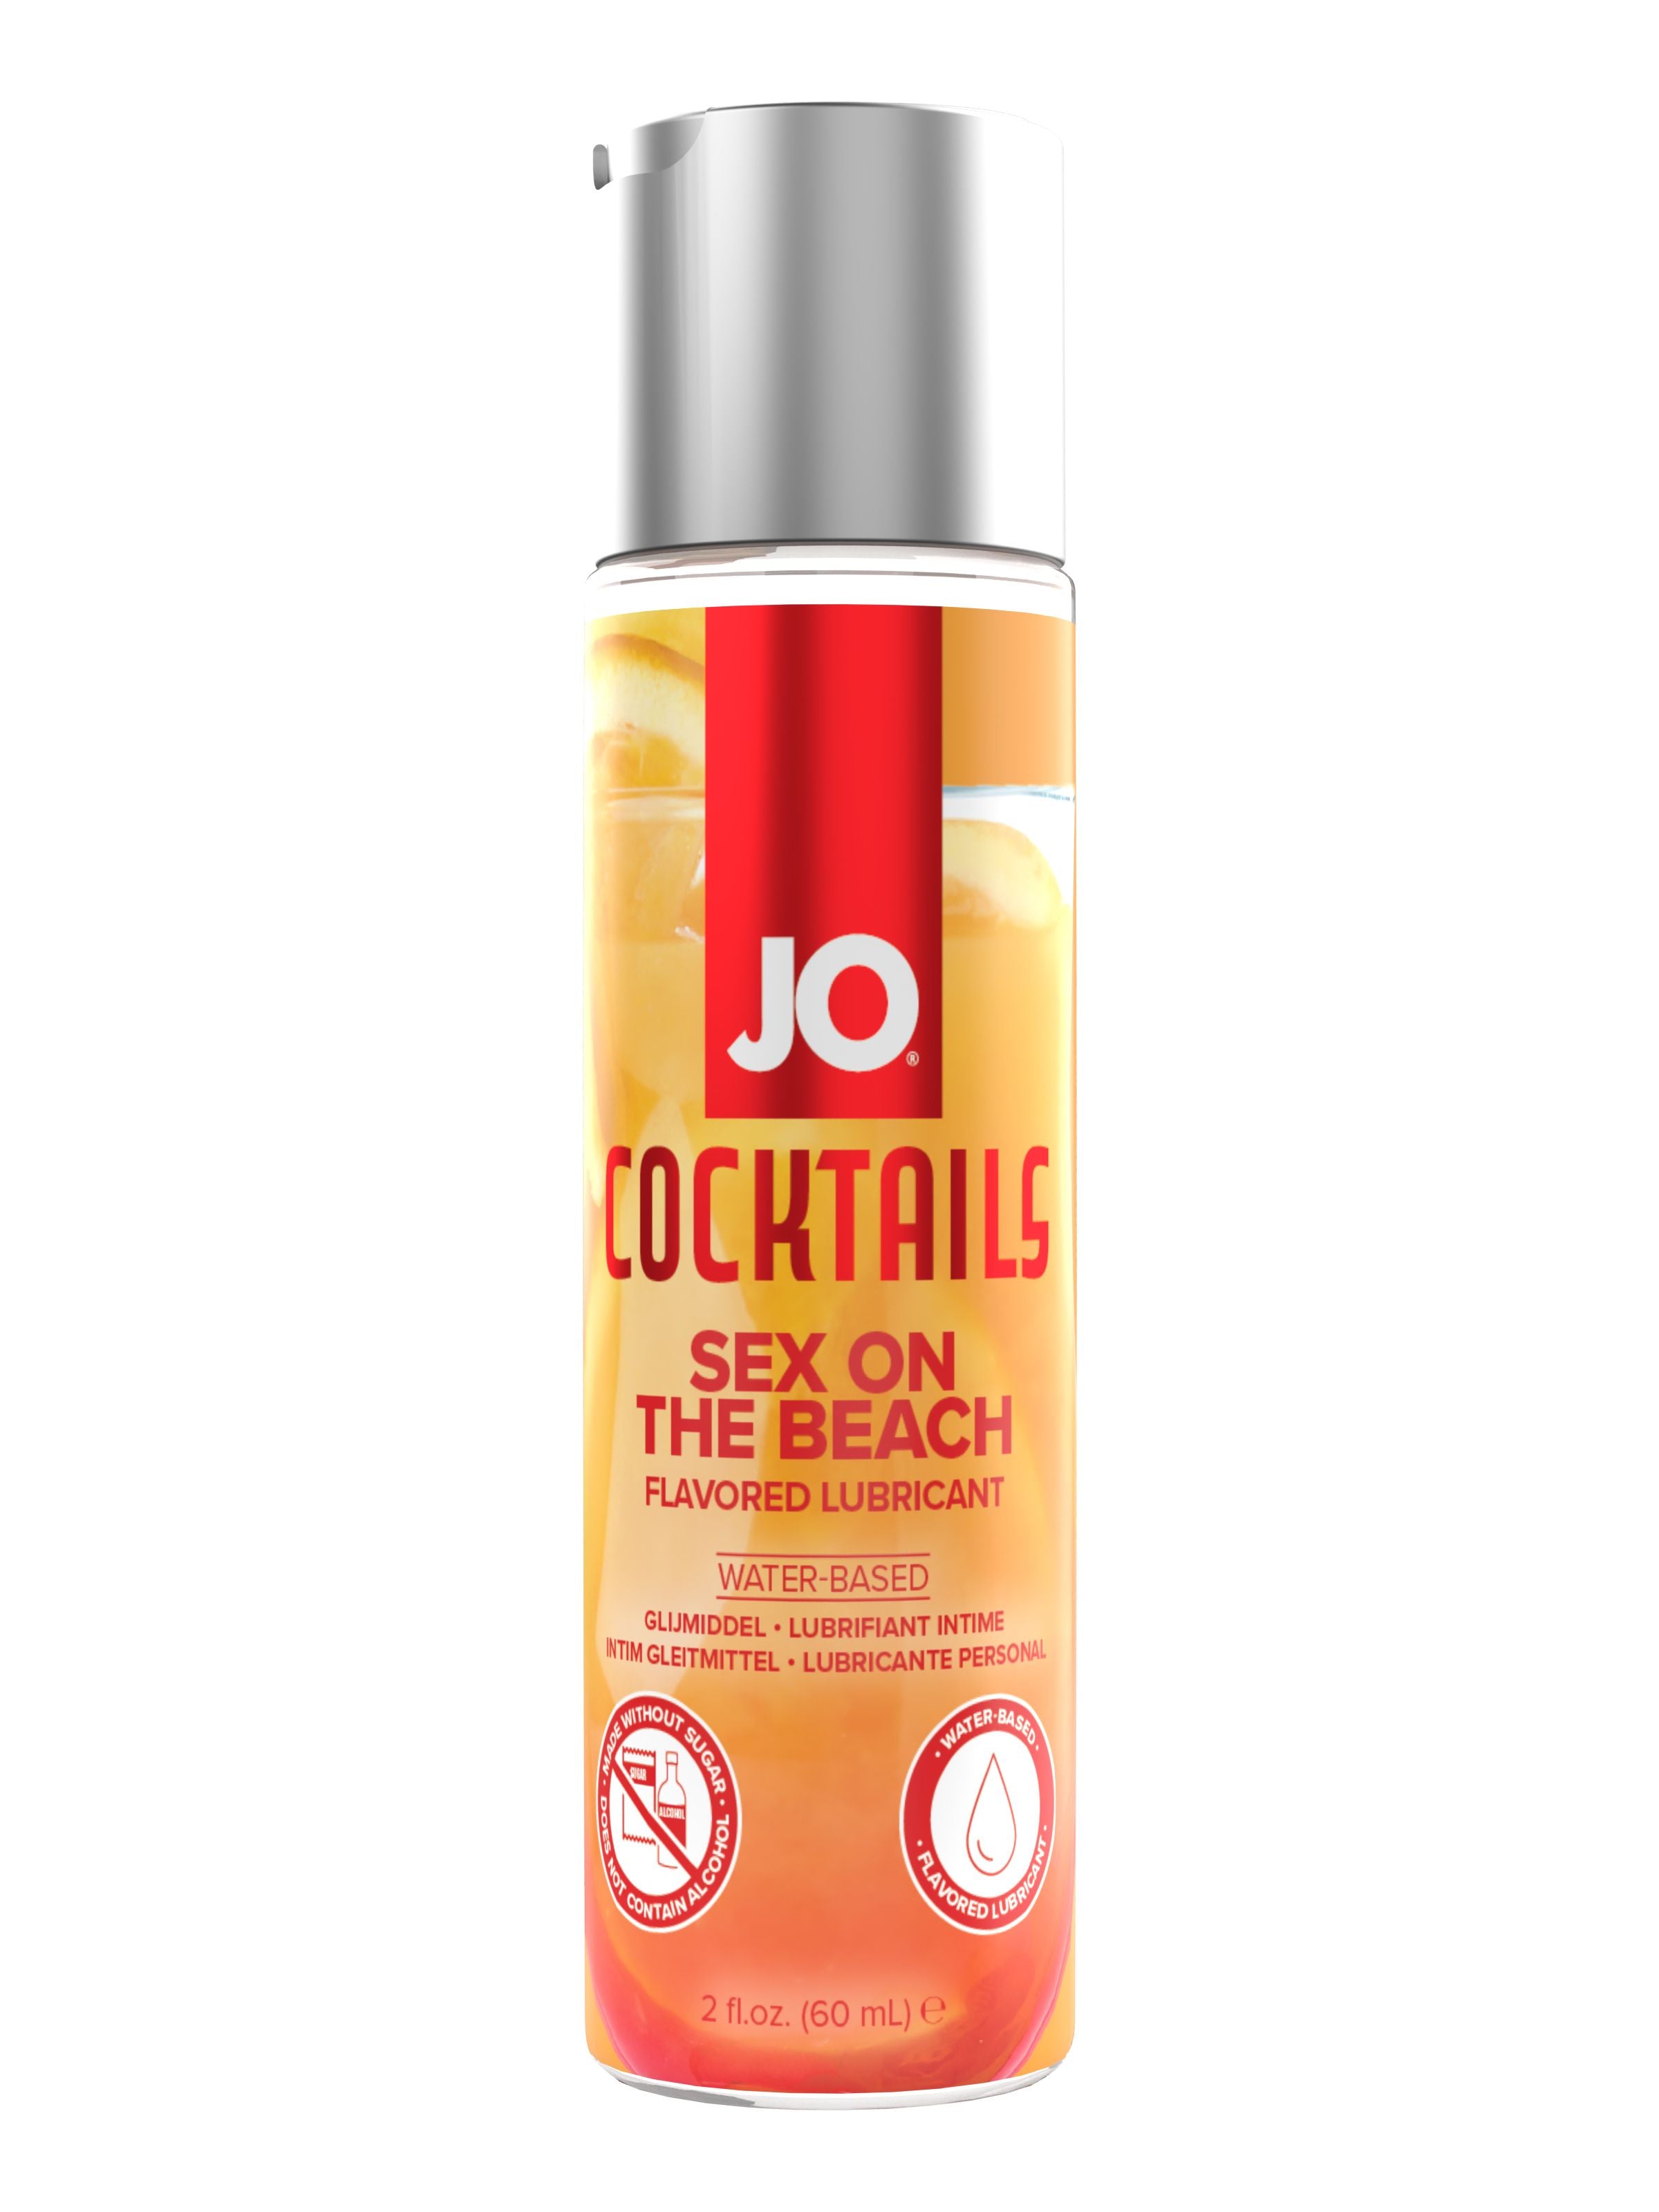 JO COCKTAILS SEX ON THE BEACH FLAVORED LUBE 2oz